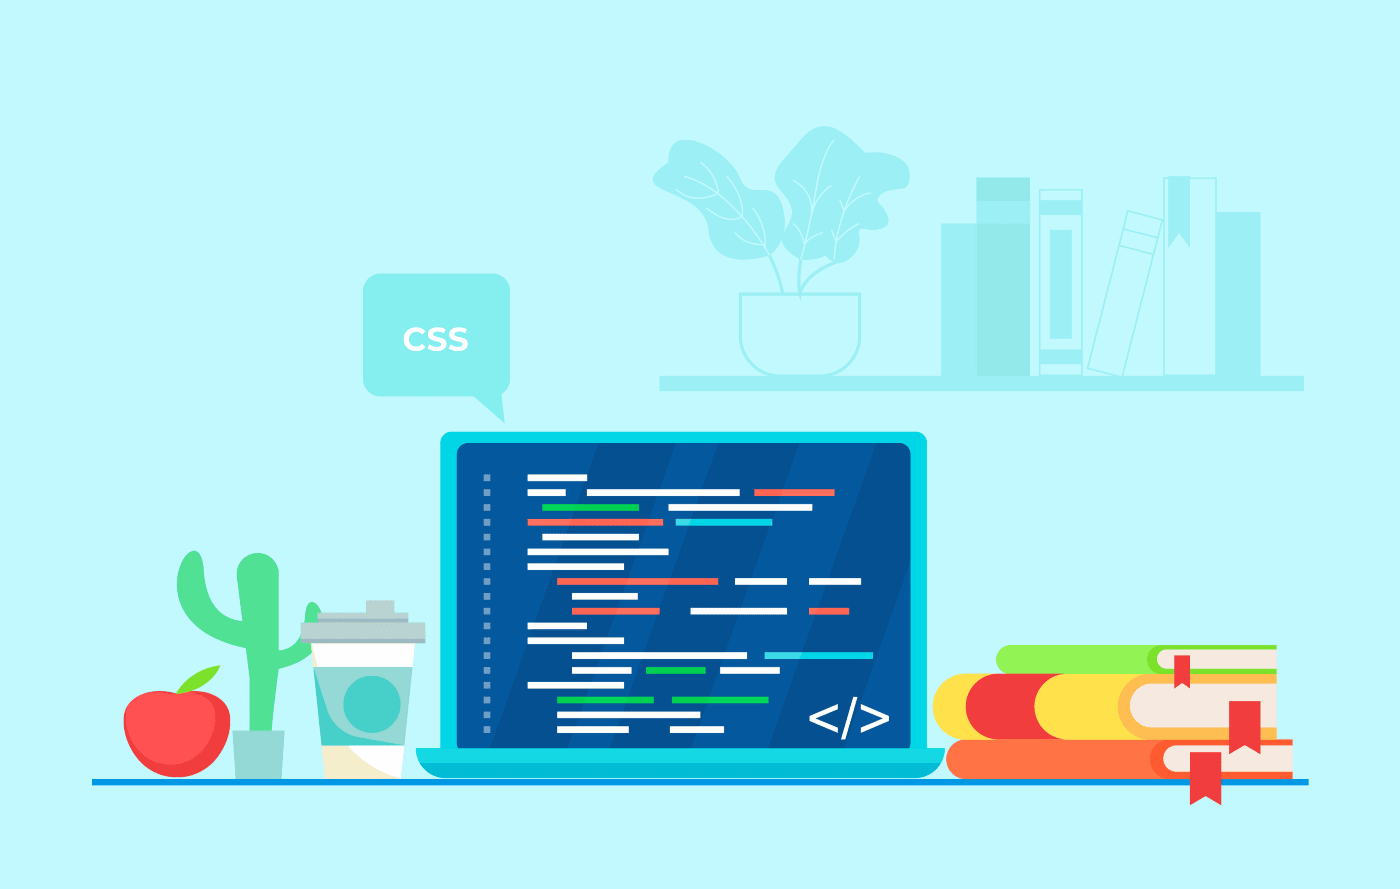 Examples of using CSS instead of JS